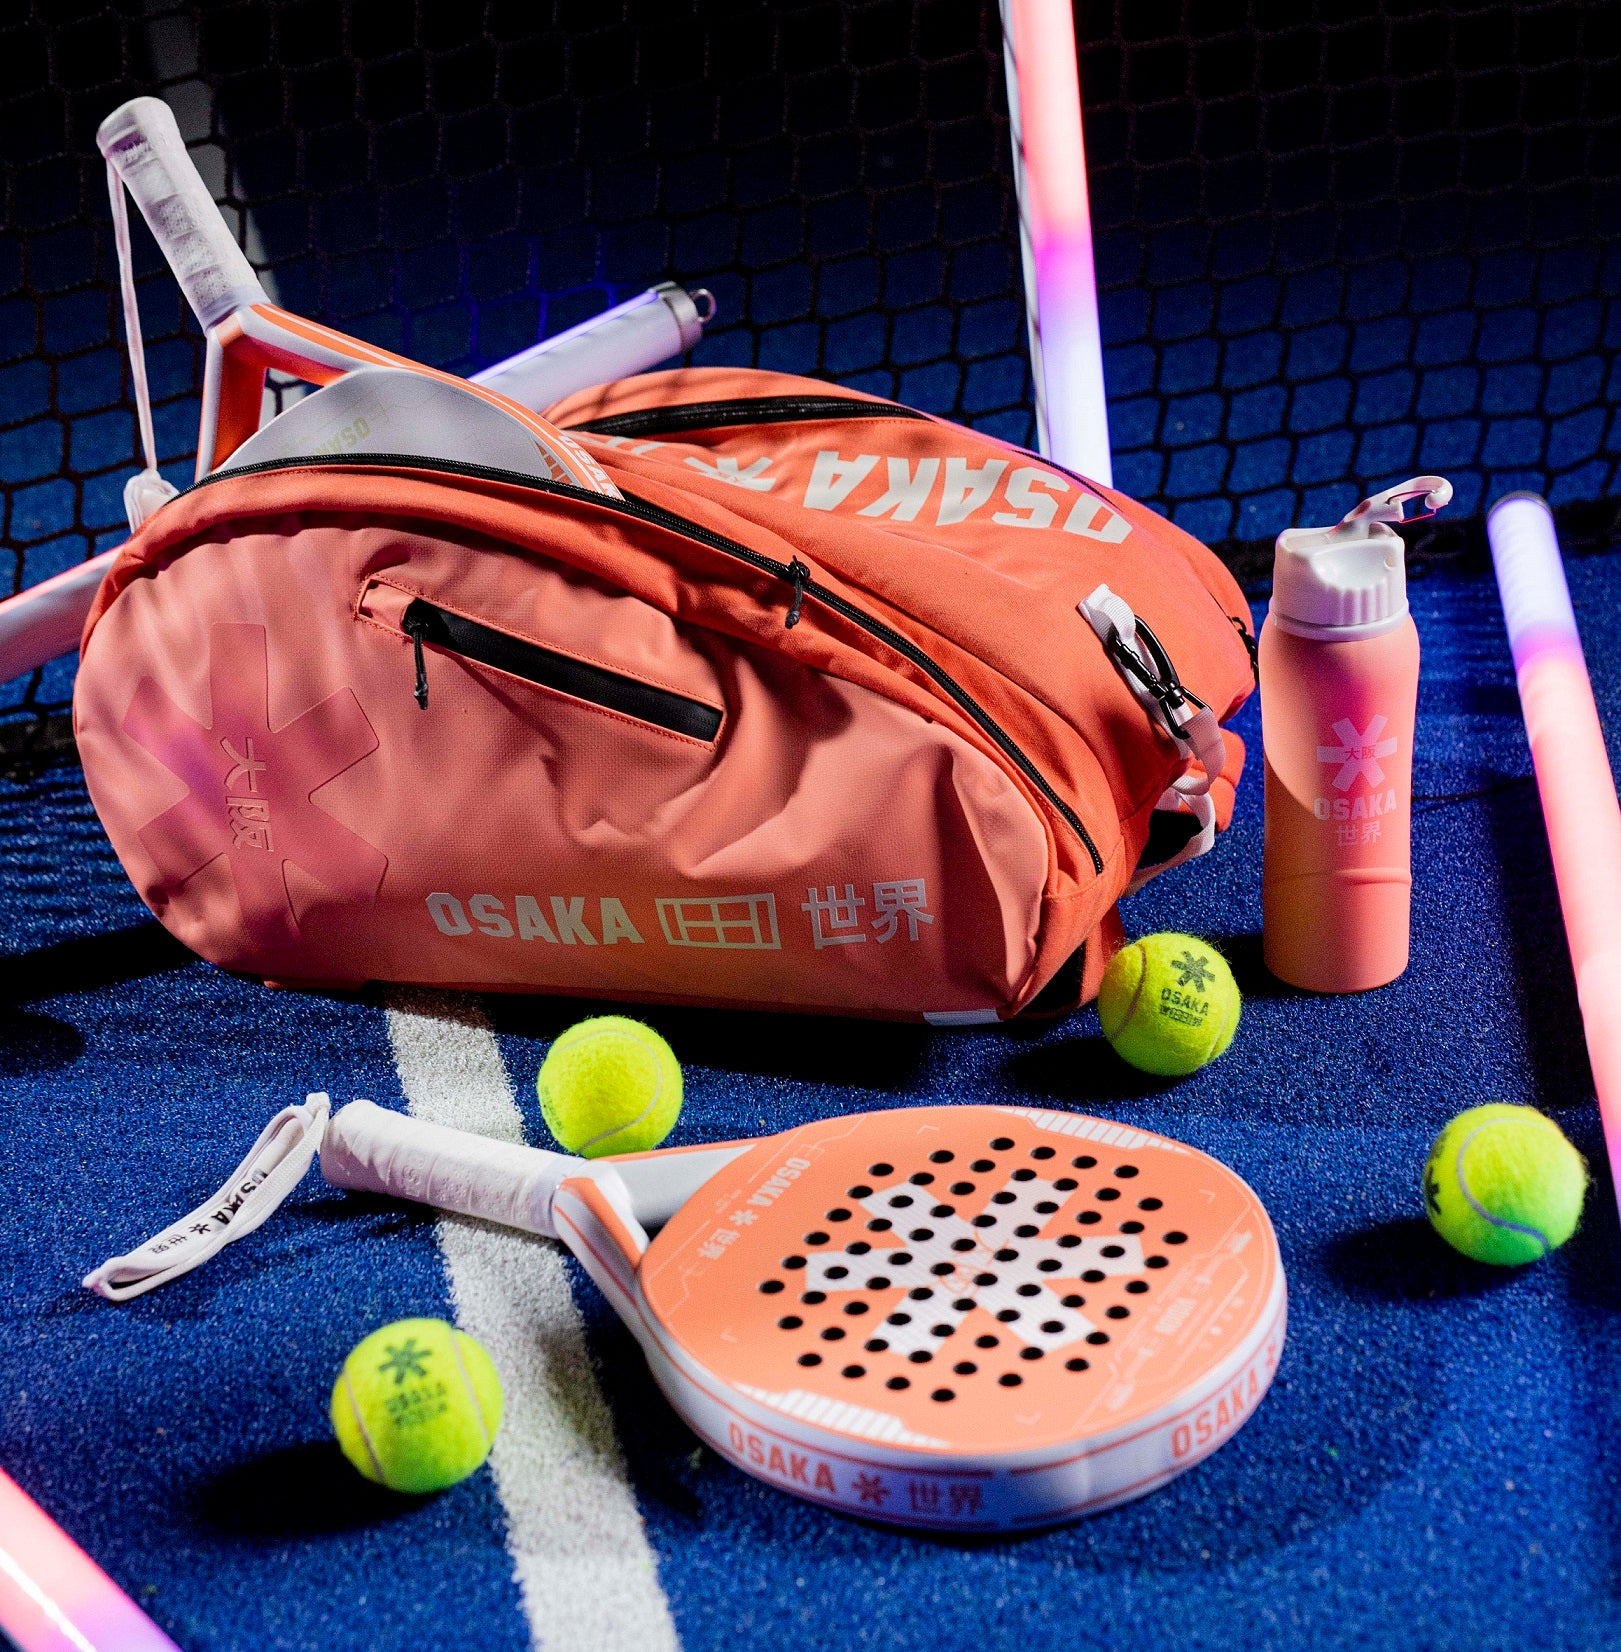 What Equipment Do You Need for Padel?